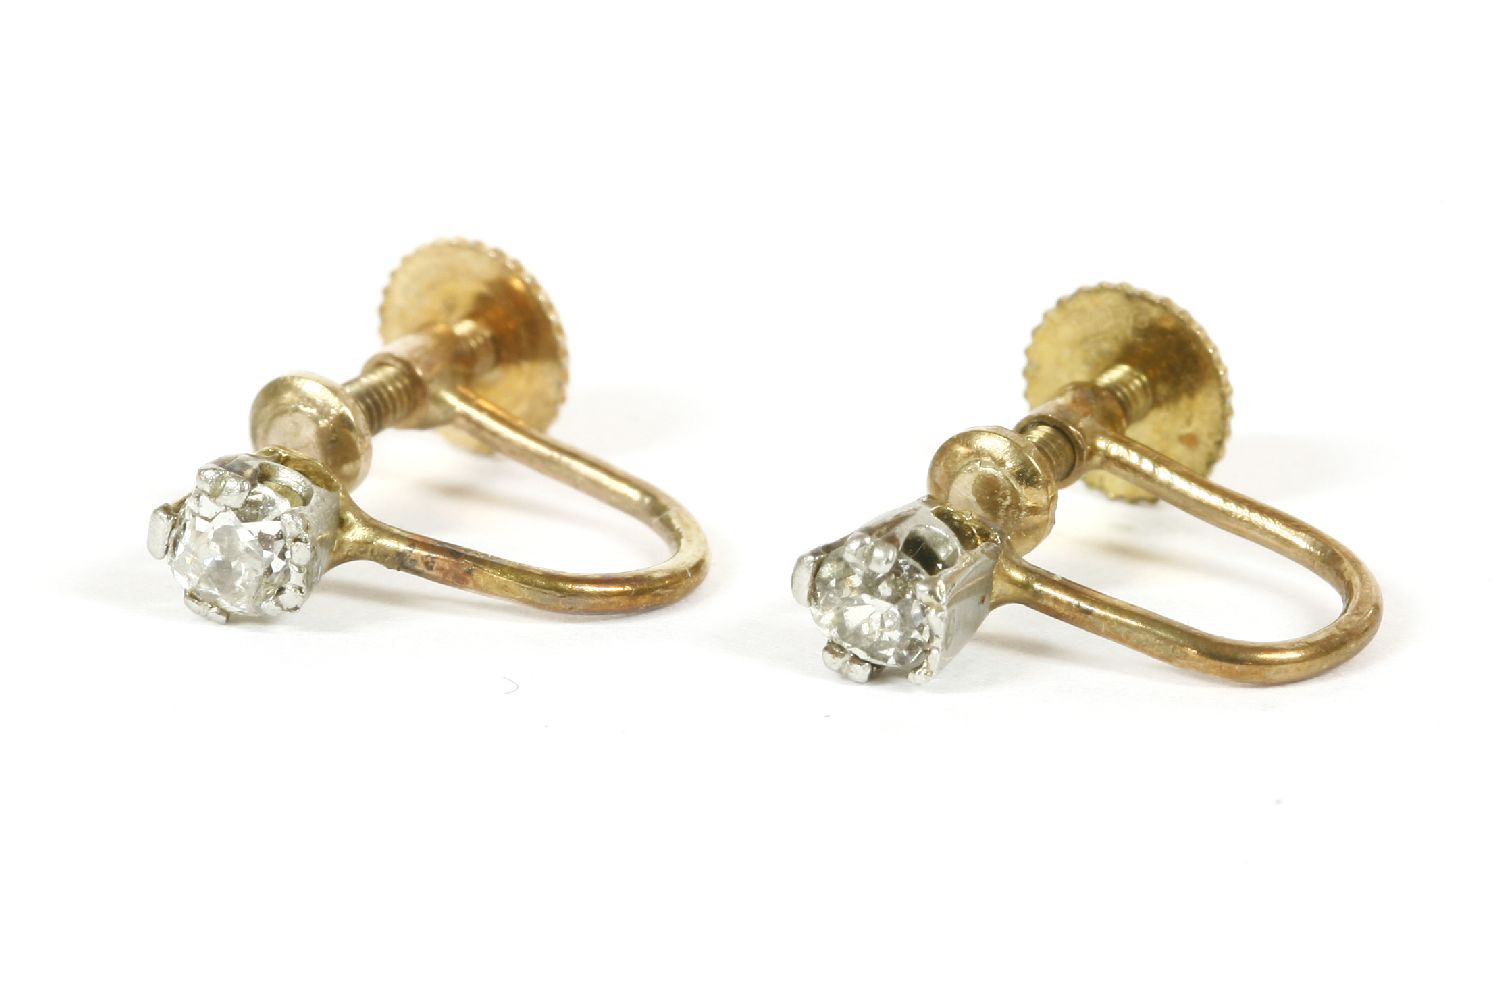 A pair of single stone cushion cut and old Swiss cut diamond screw back earrings, marked 9ct1.27g